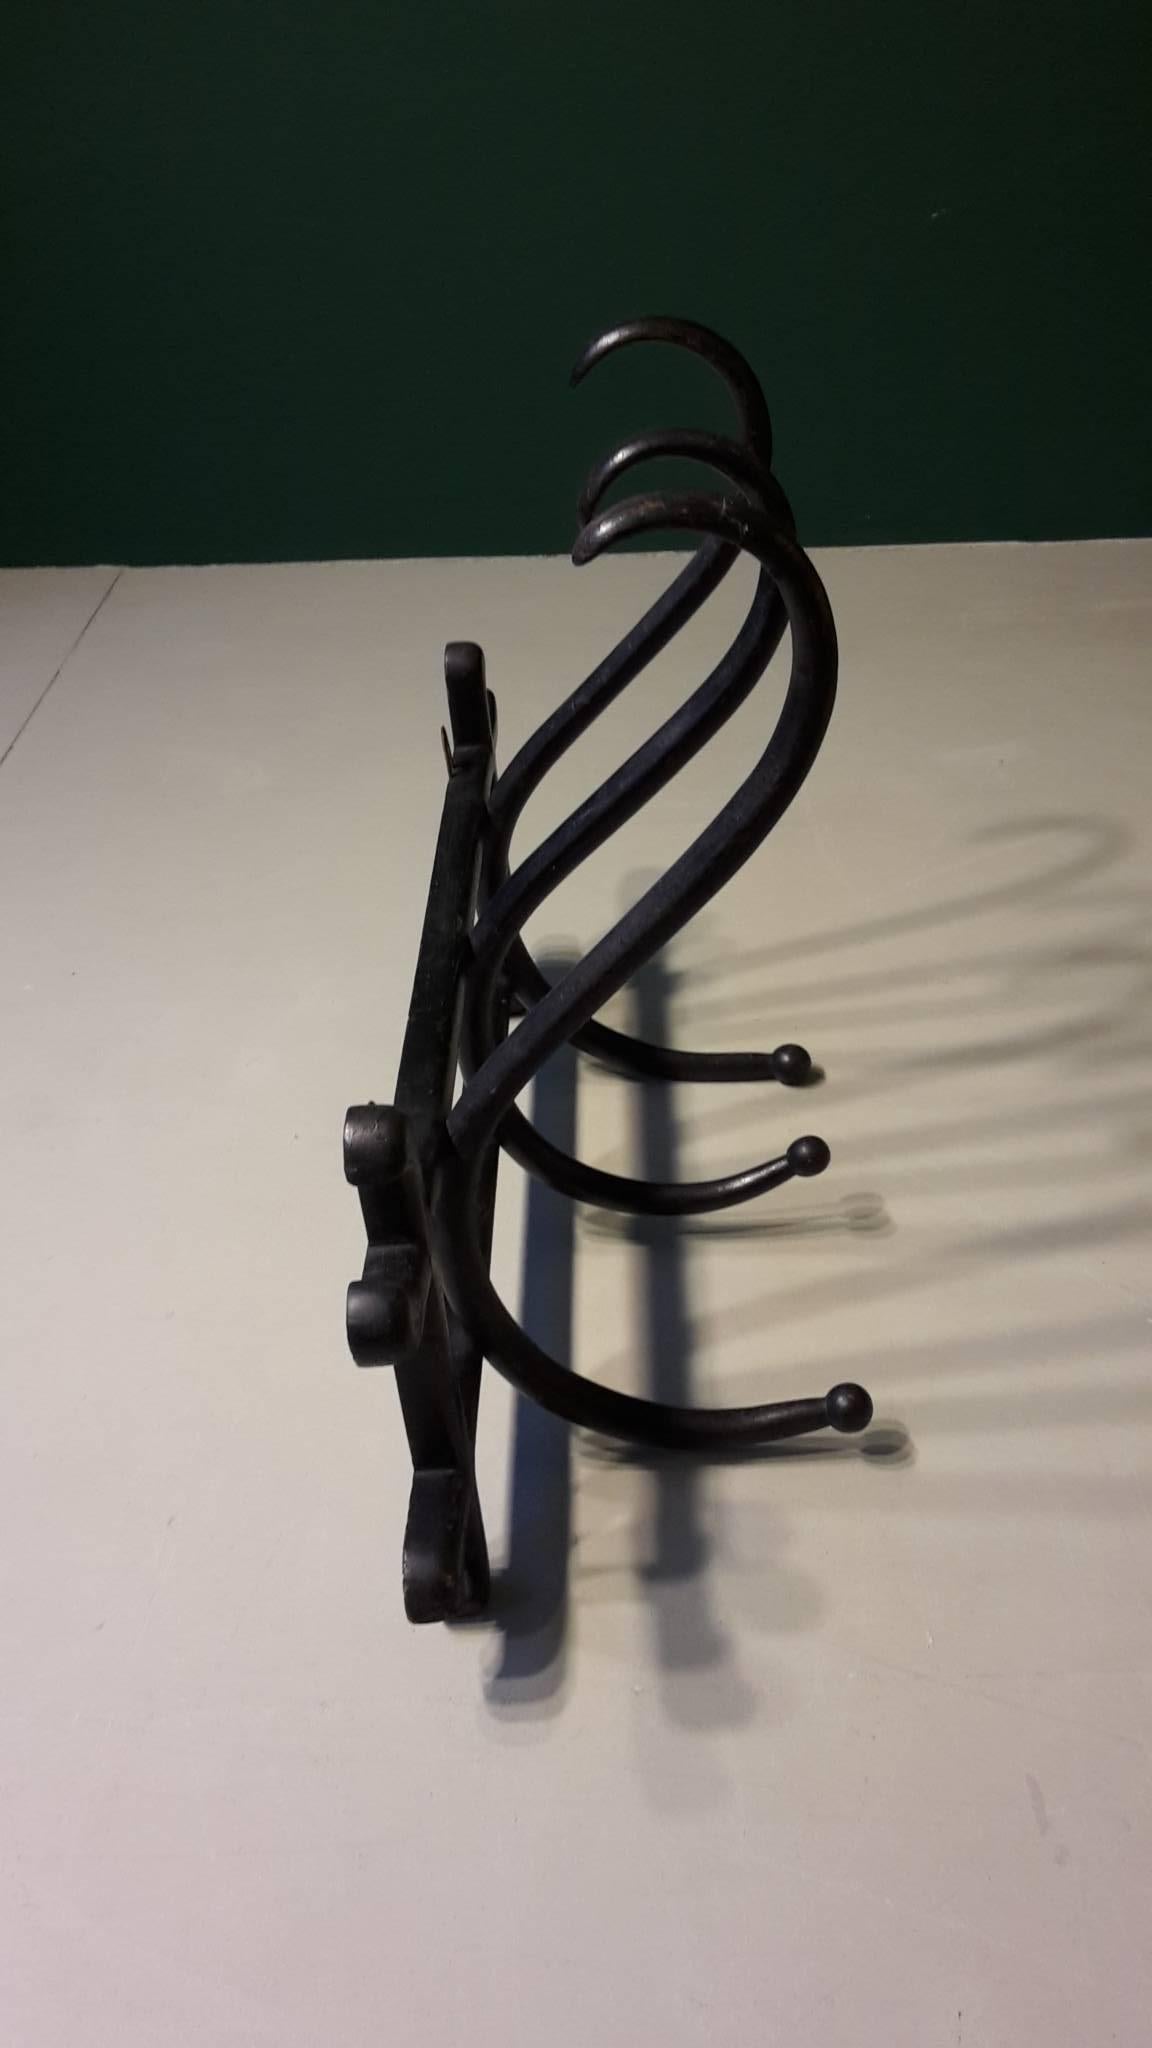 Early 20th century German black wall coat rack made of bentwood by Thonet.